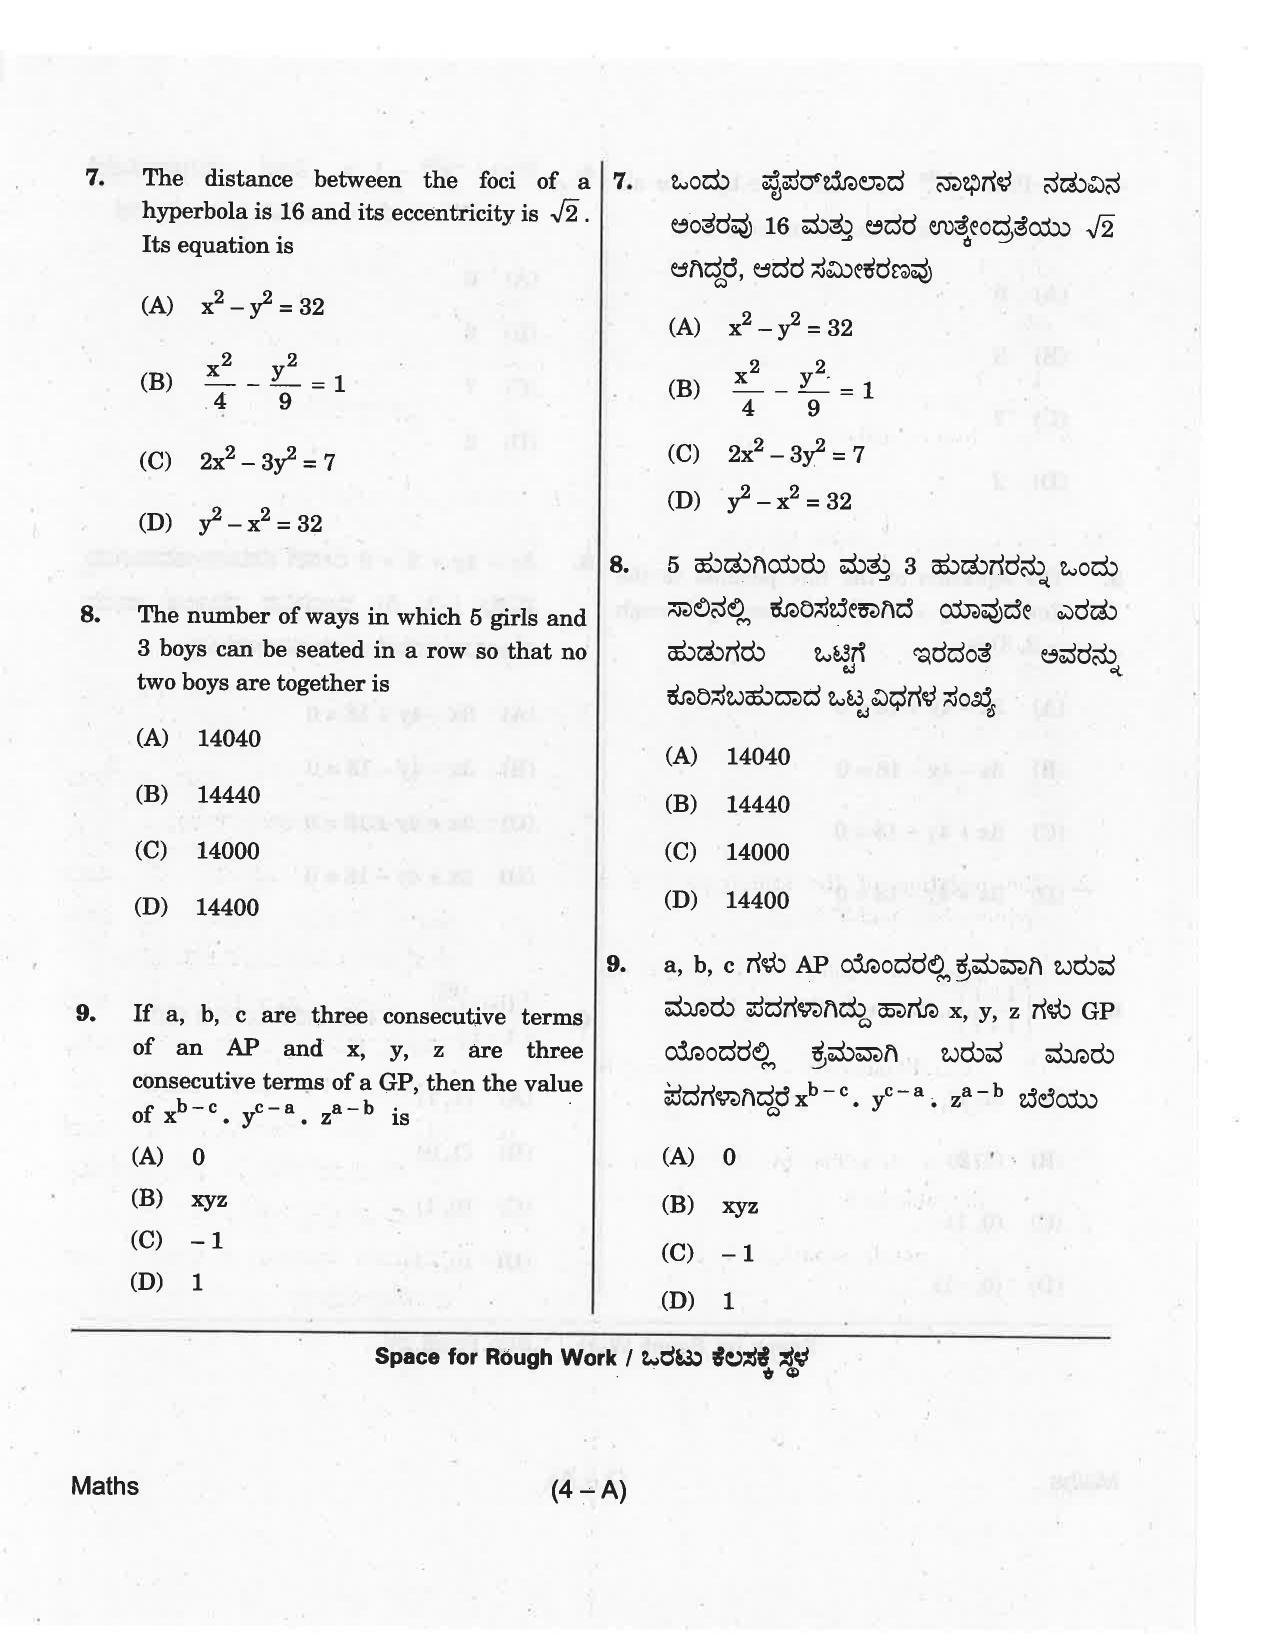 KCET Mathematics 2018 Question Papers - Page 4